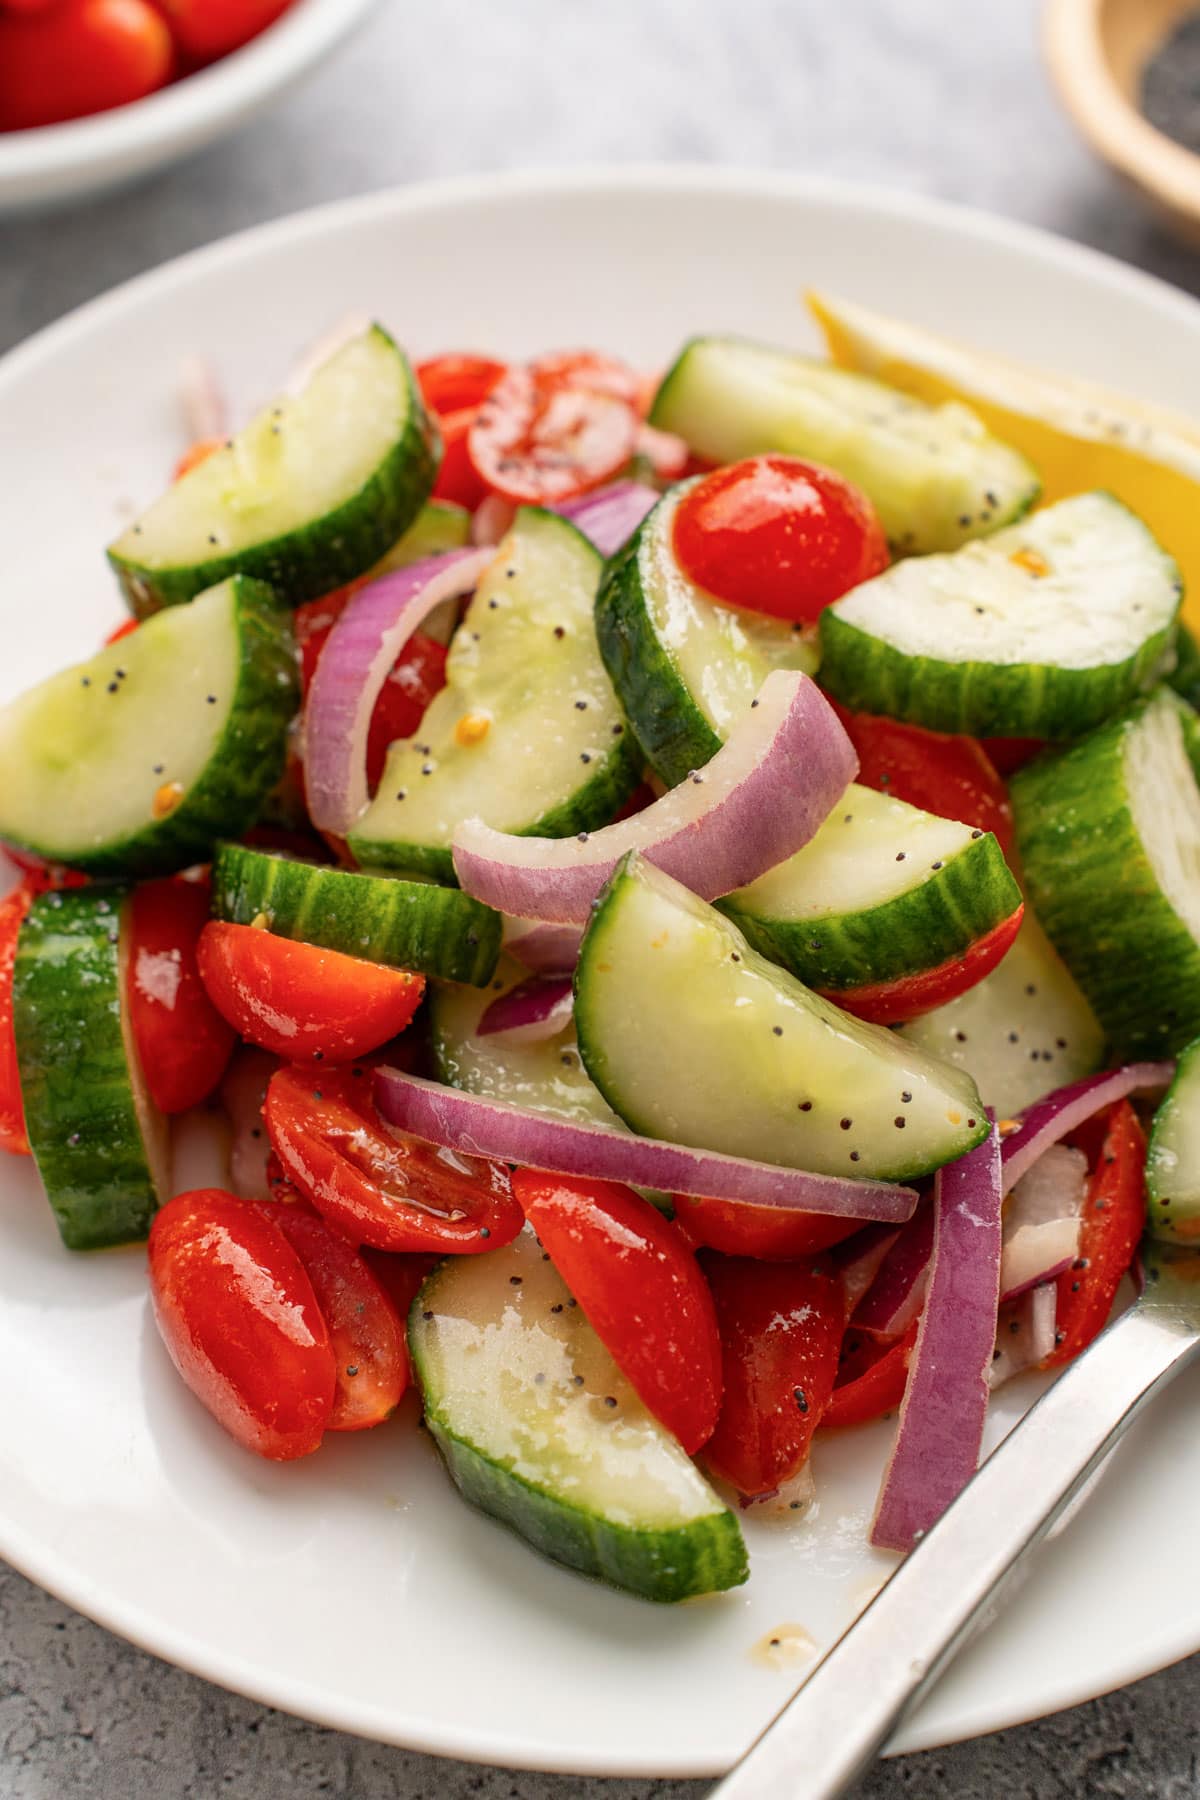 Cucumber tomato salad served on a white plate.